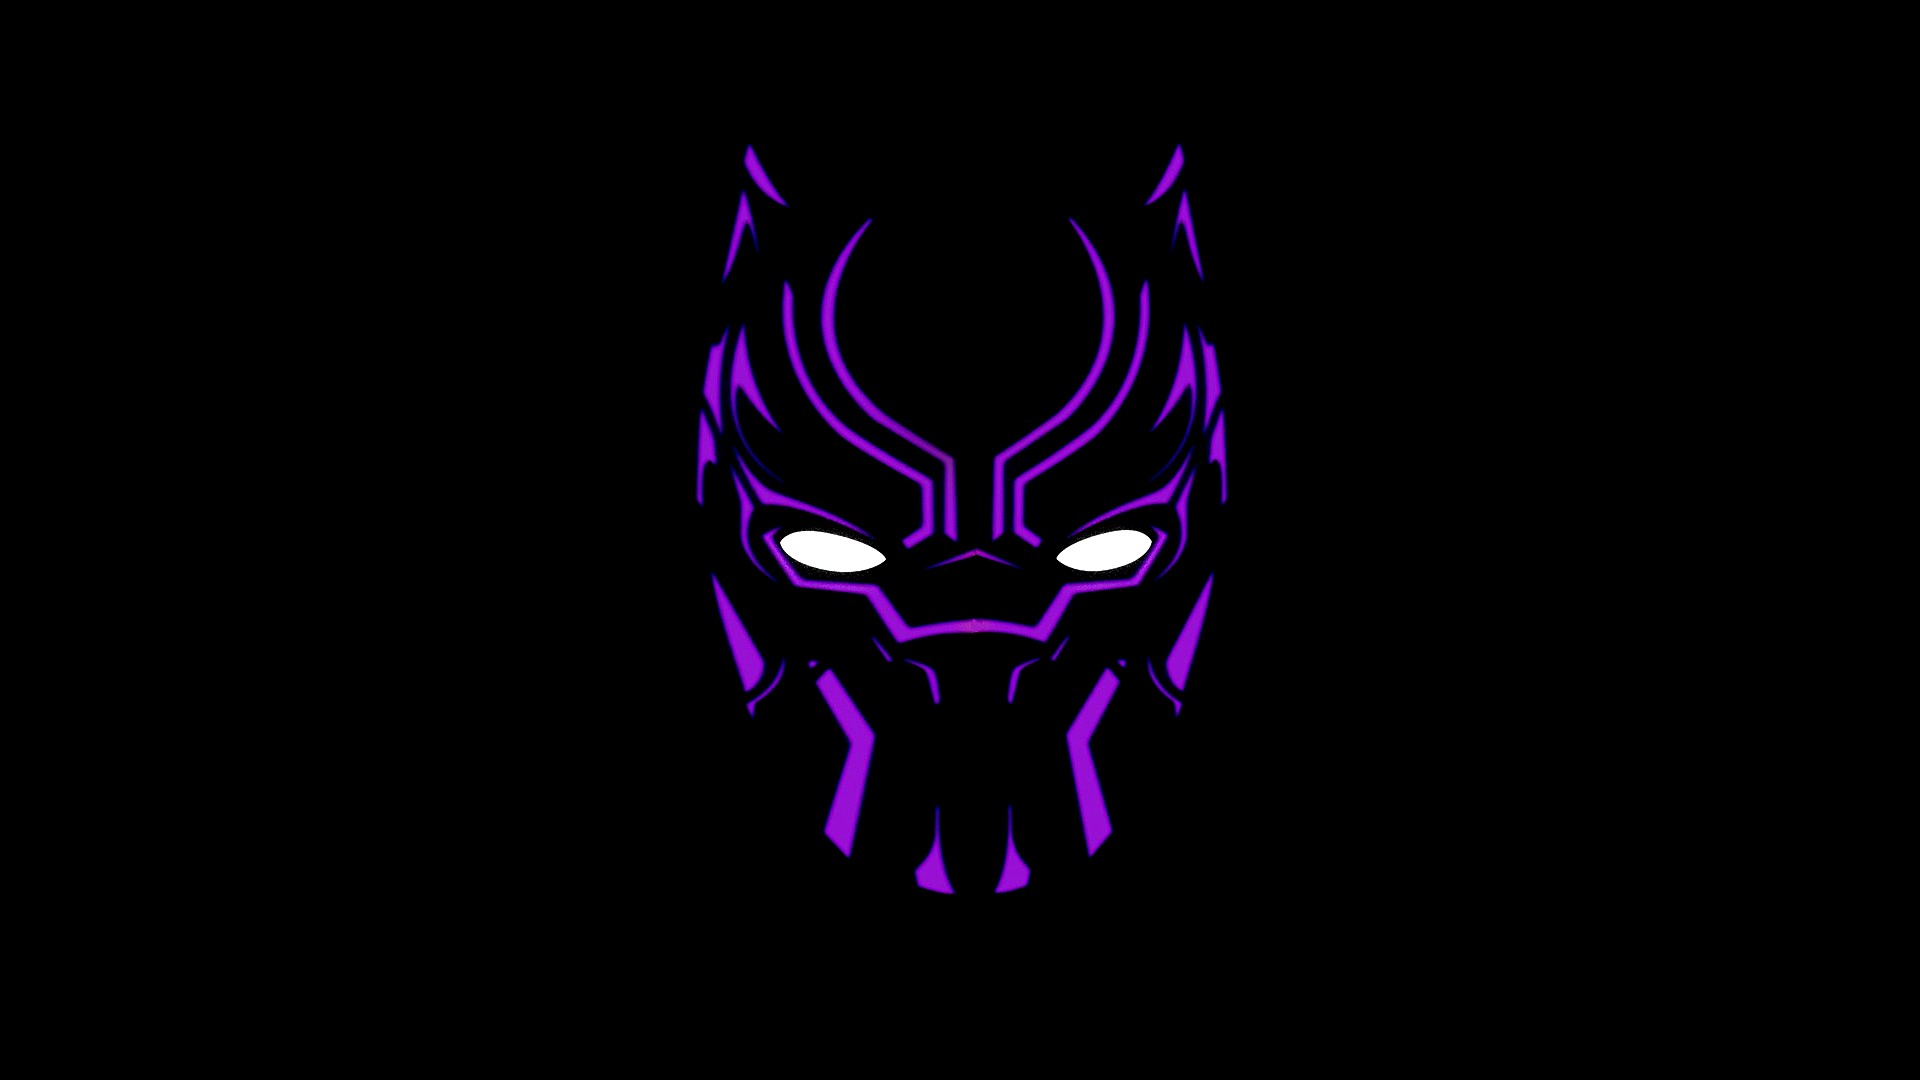 Movie Wallpaper Black Panther with high-resolution 1920x1080 pixel. You can use this poster wallpaper for your Desktop Computers, Mac Screensavers, Windows Backgrounds, iPhone Wallpapers, Tablet or Android Lock screen and another Mobile device